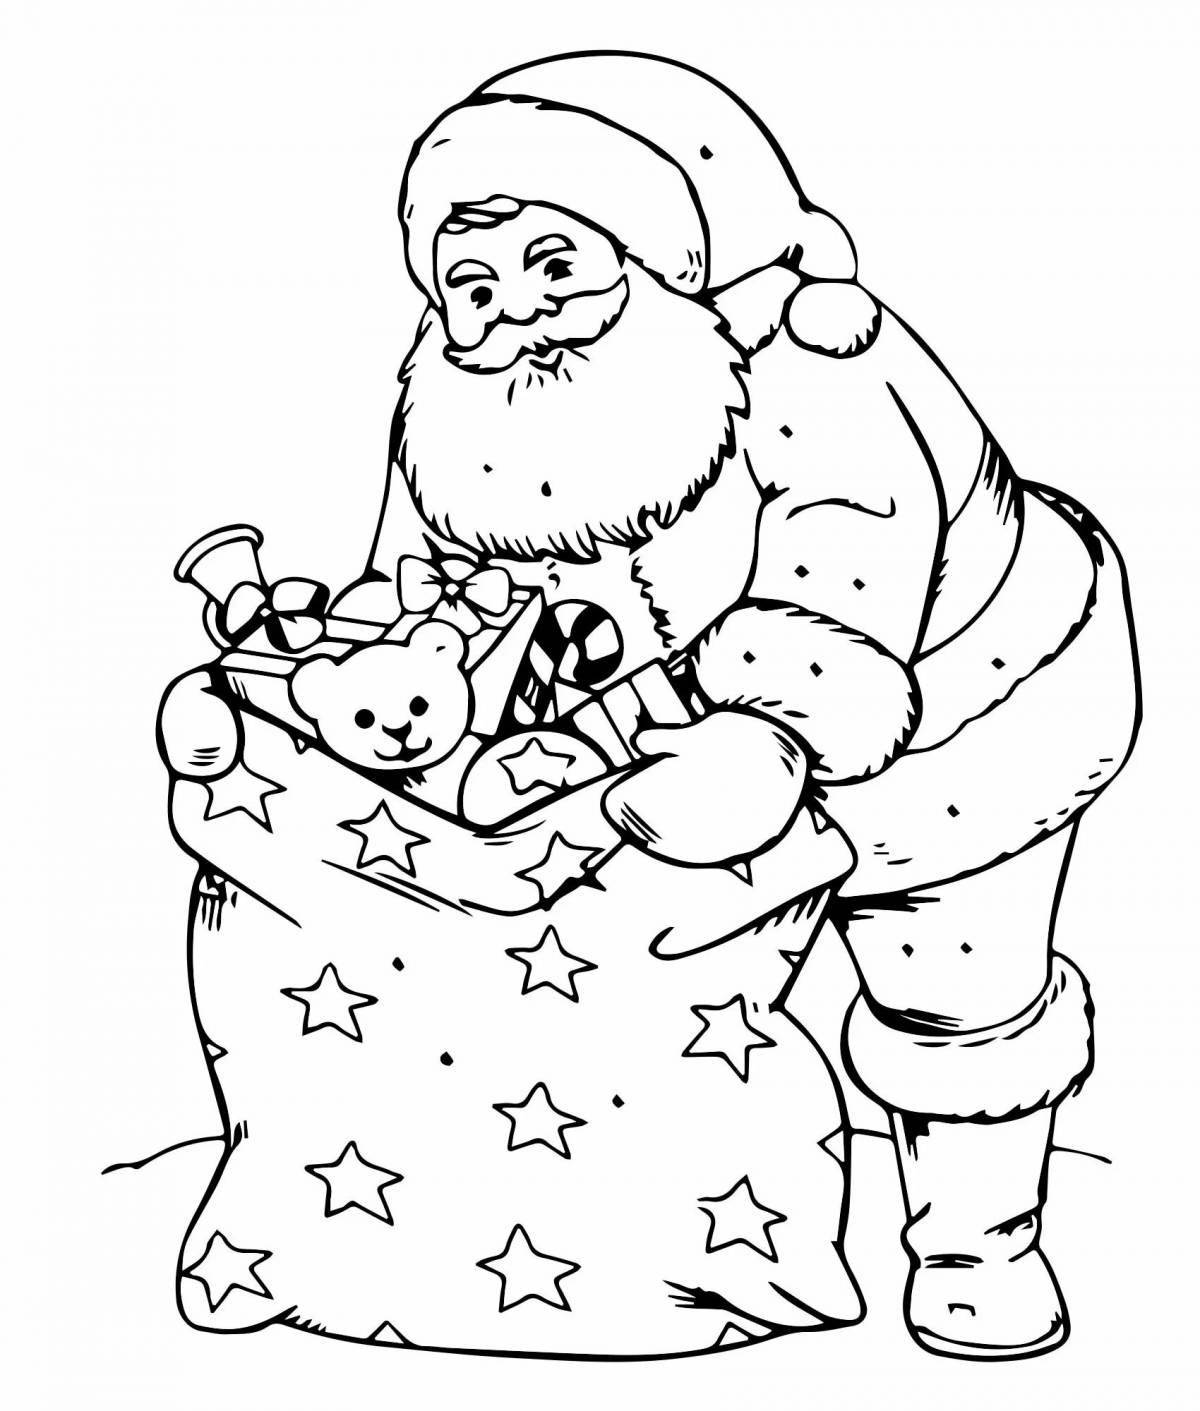 Glorious Christmas coloring book for boys